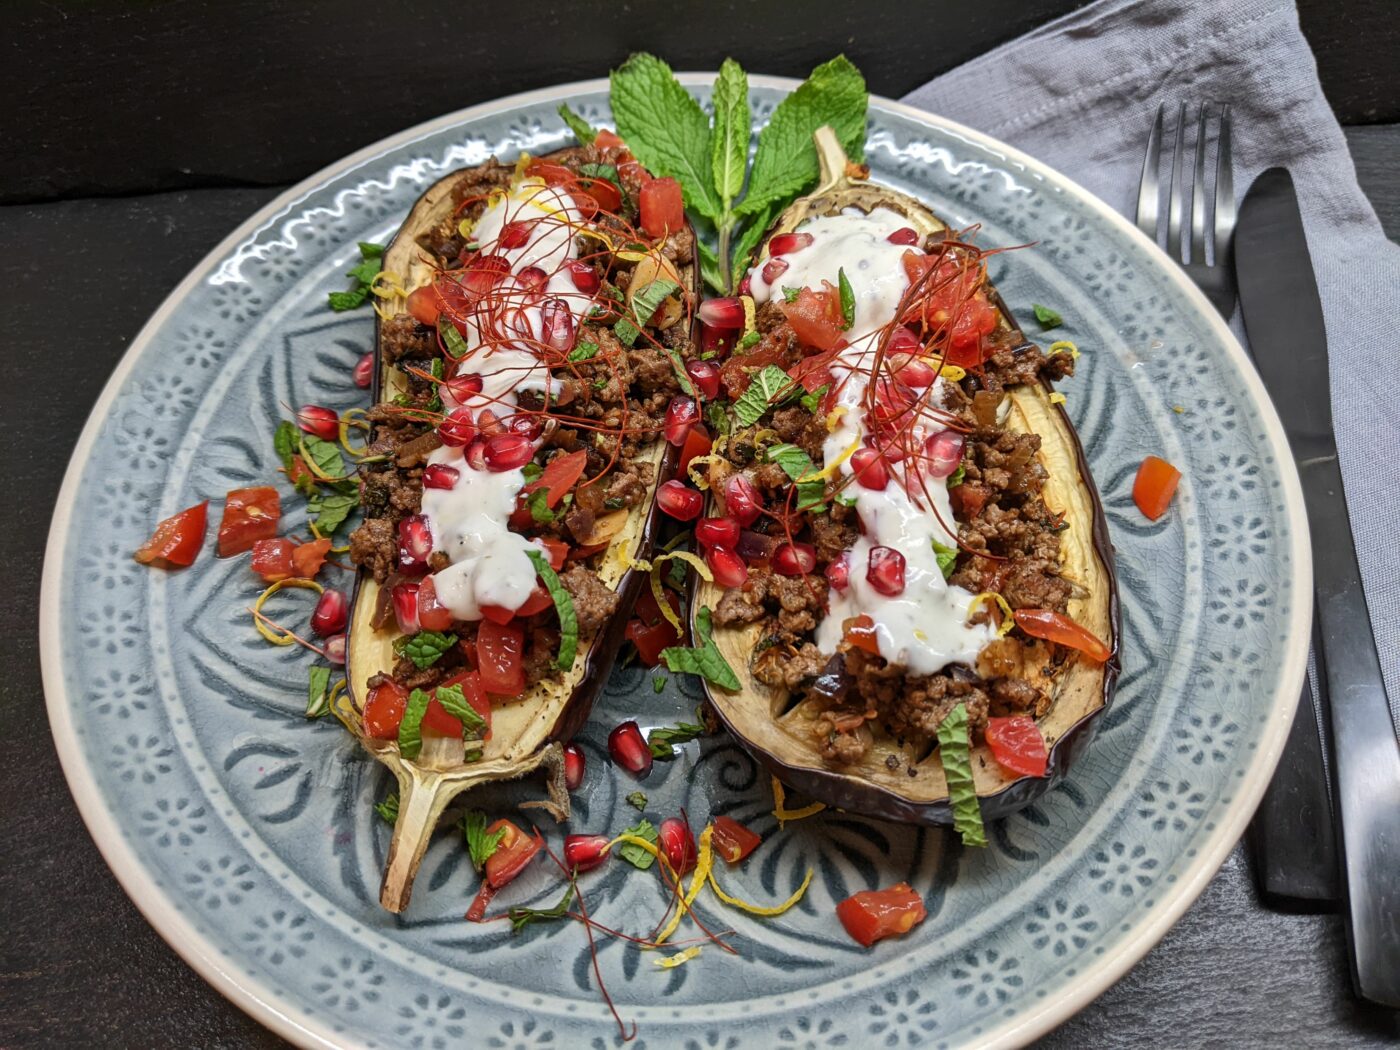 Eggplant with oriental spiced venison minced meat and yogurt